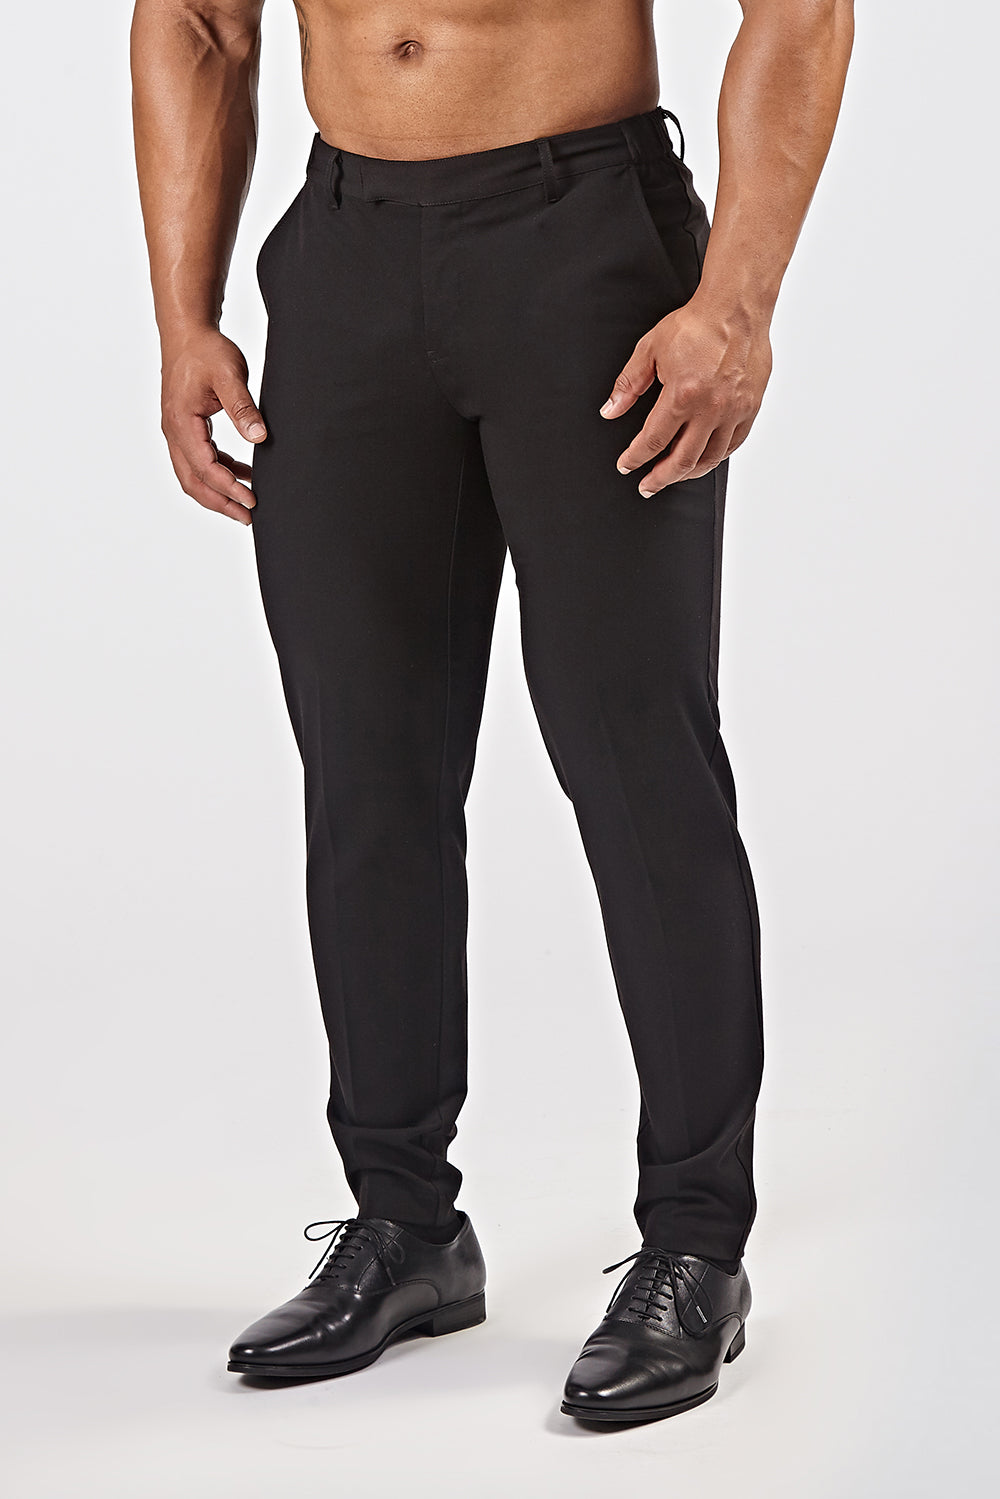 Types of Athletic Pants: What's The Best Option? - TAILORED ATHLETE - USA